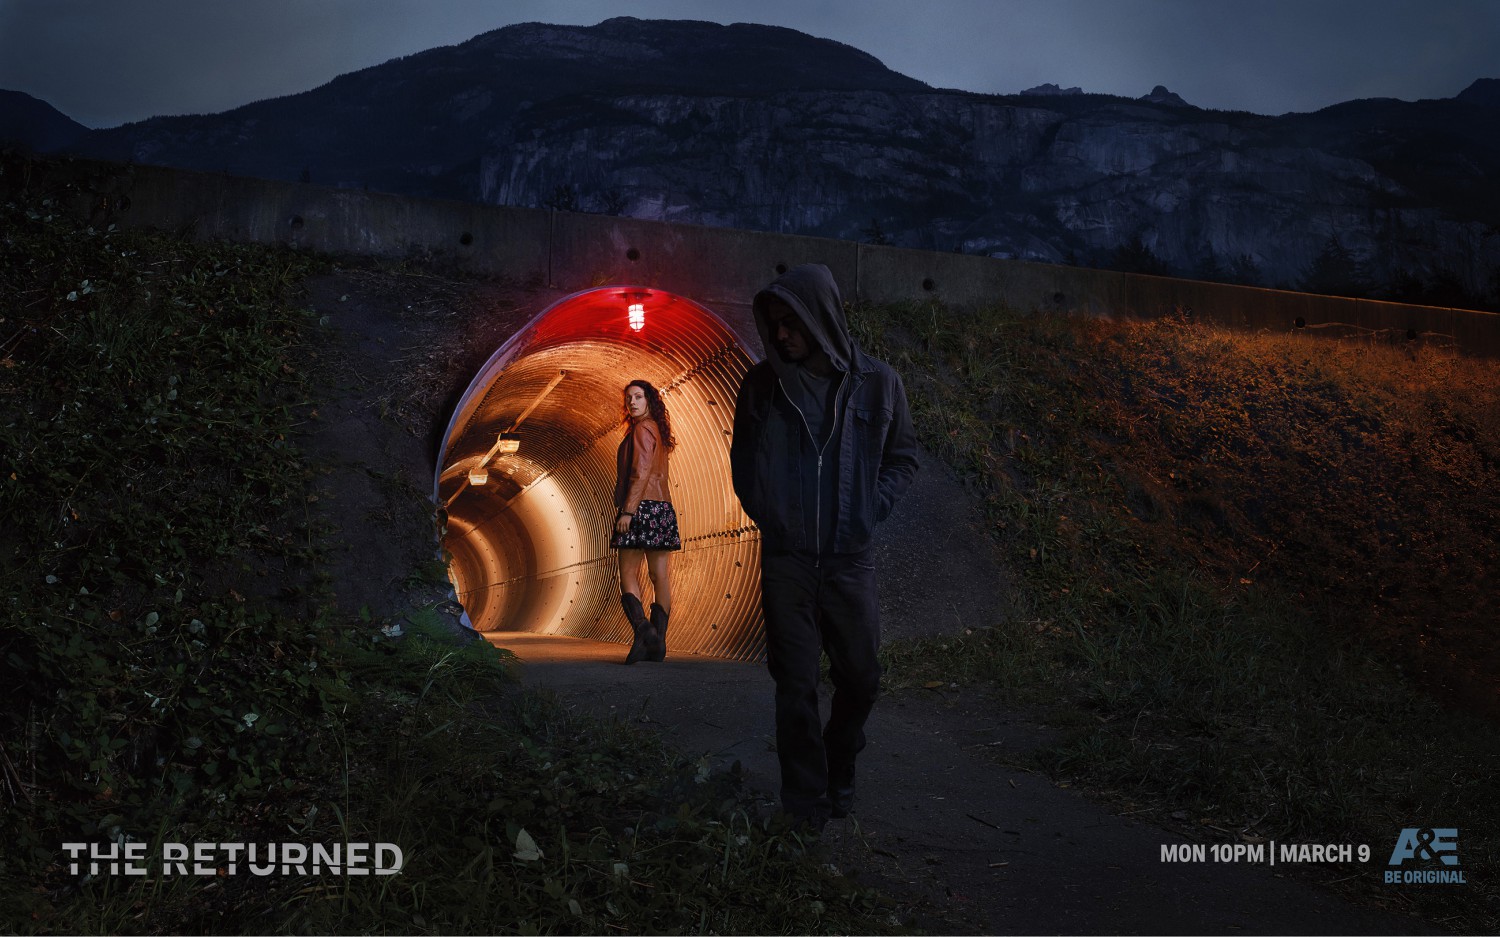 Extra Large TV Poster Image for The Returned (#6 of 8)